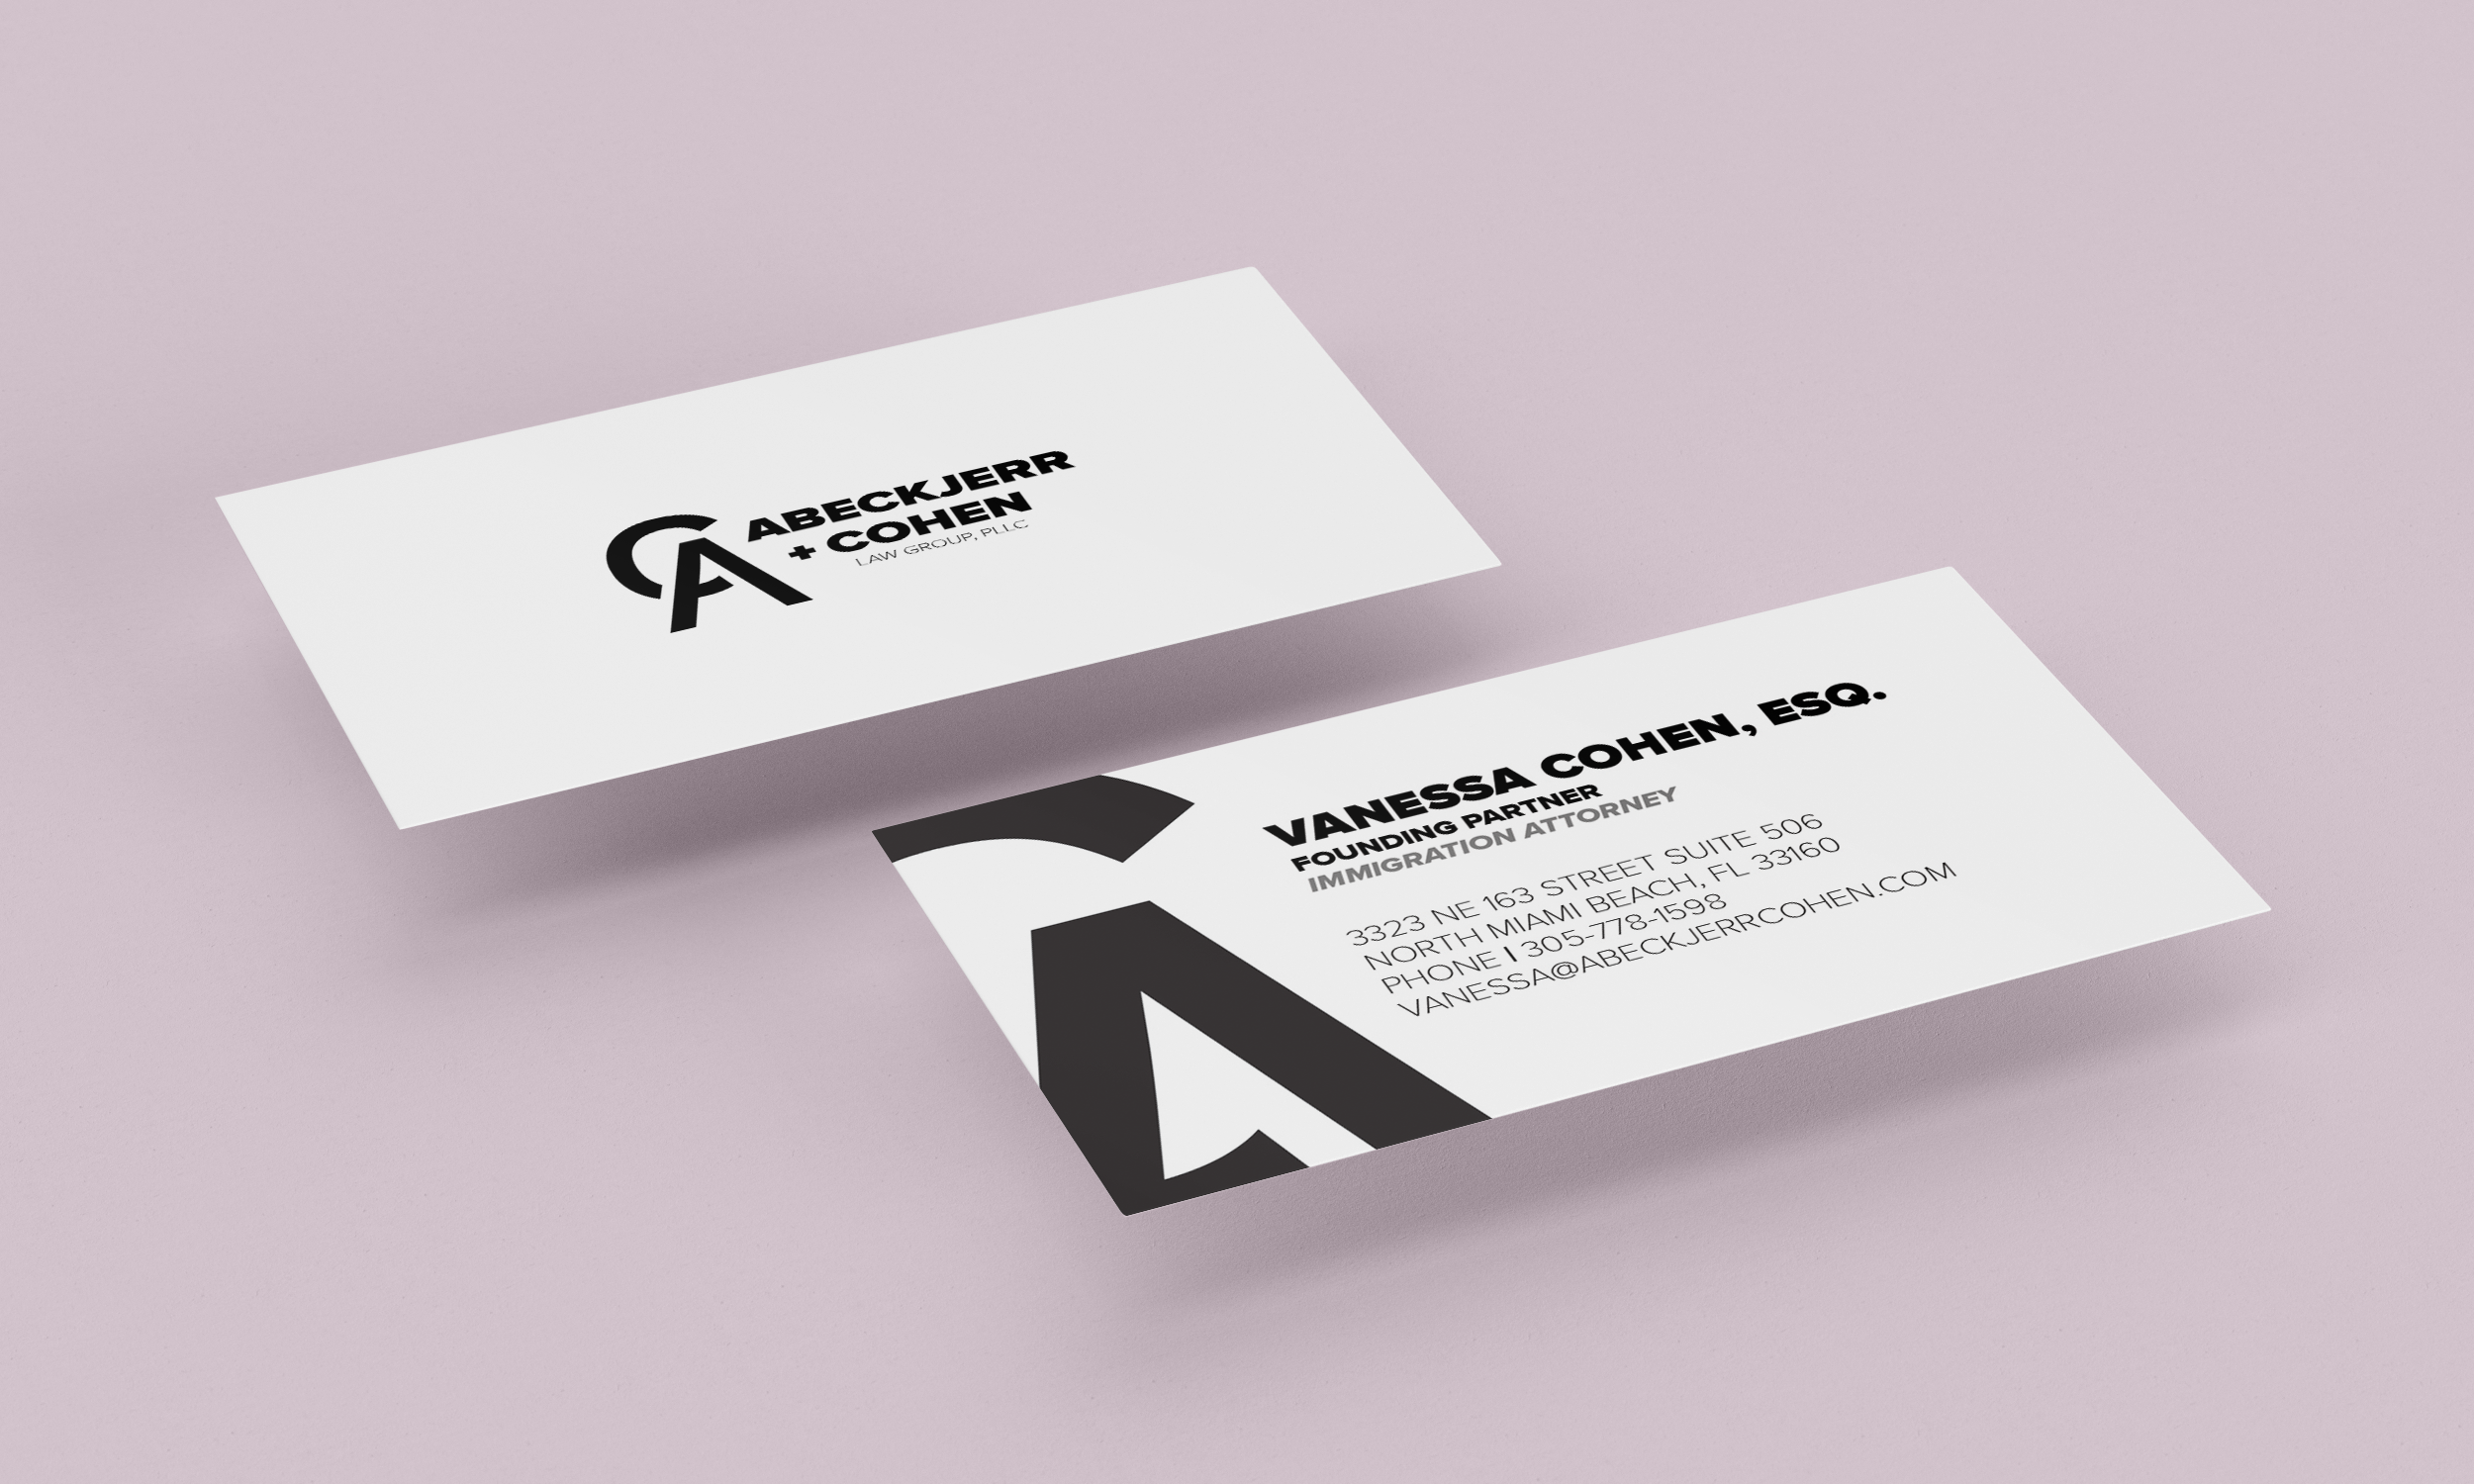 abeckerr-cohen-law-group-business-cards.png